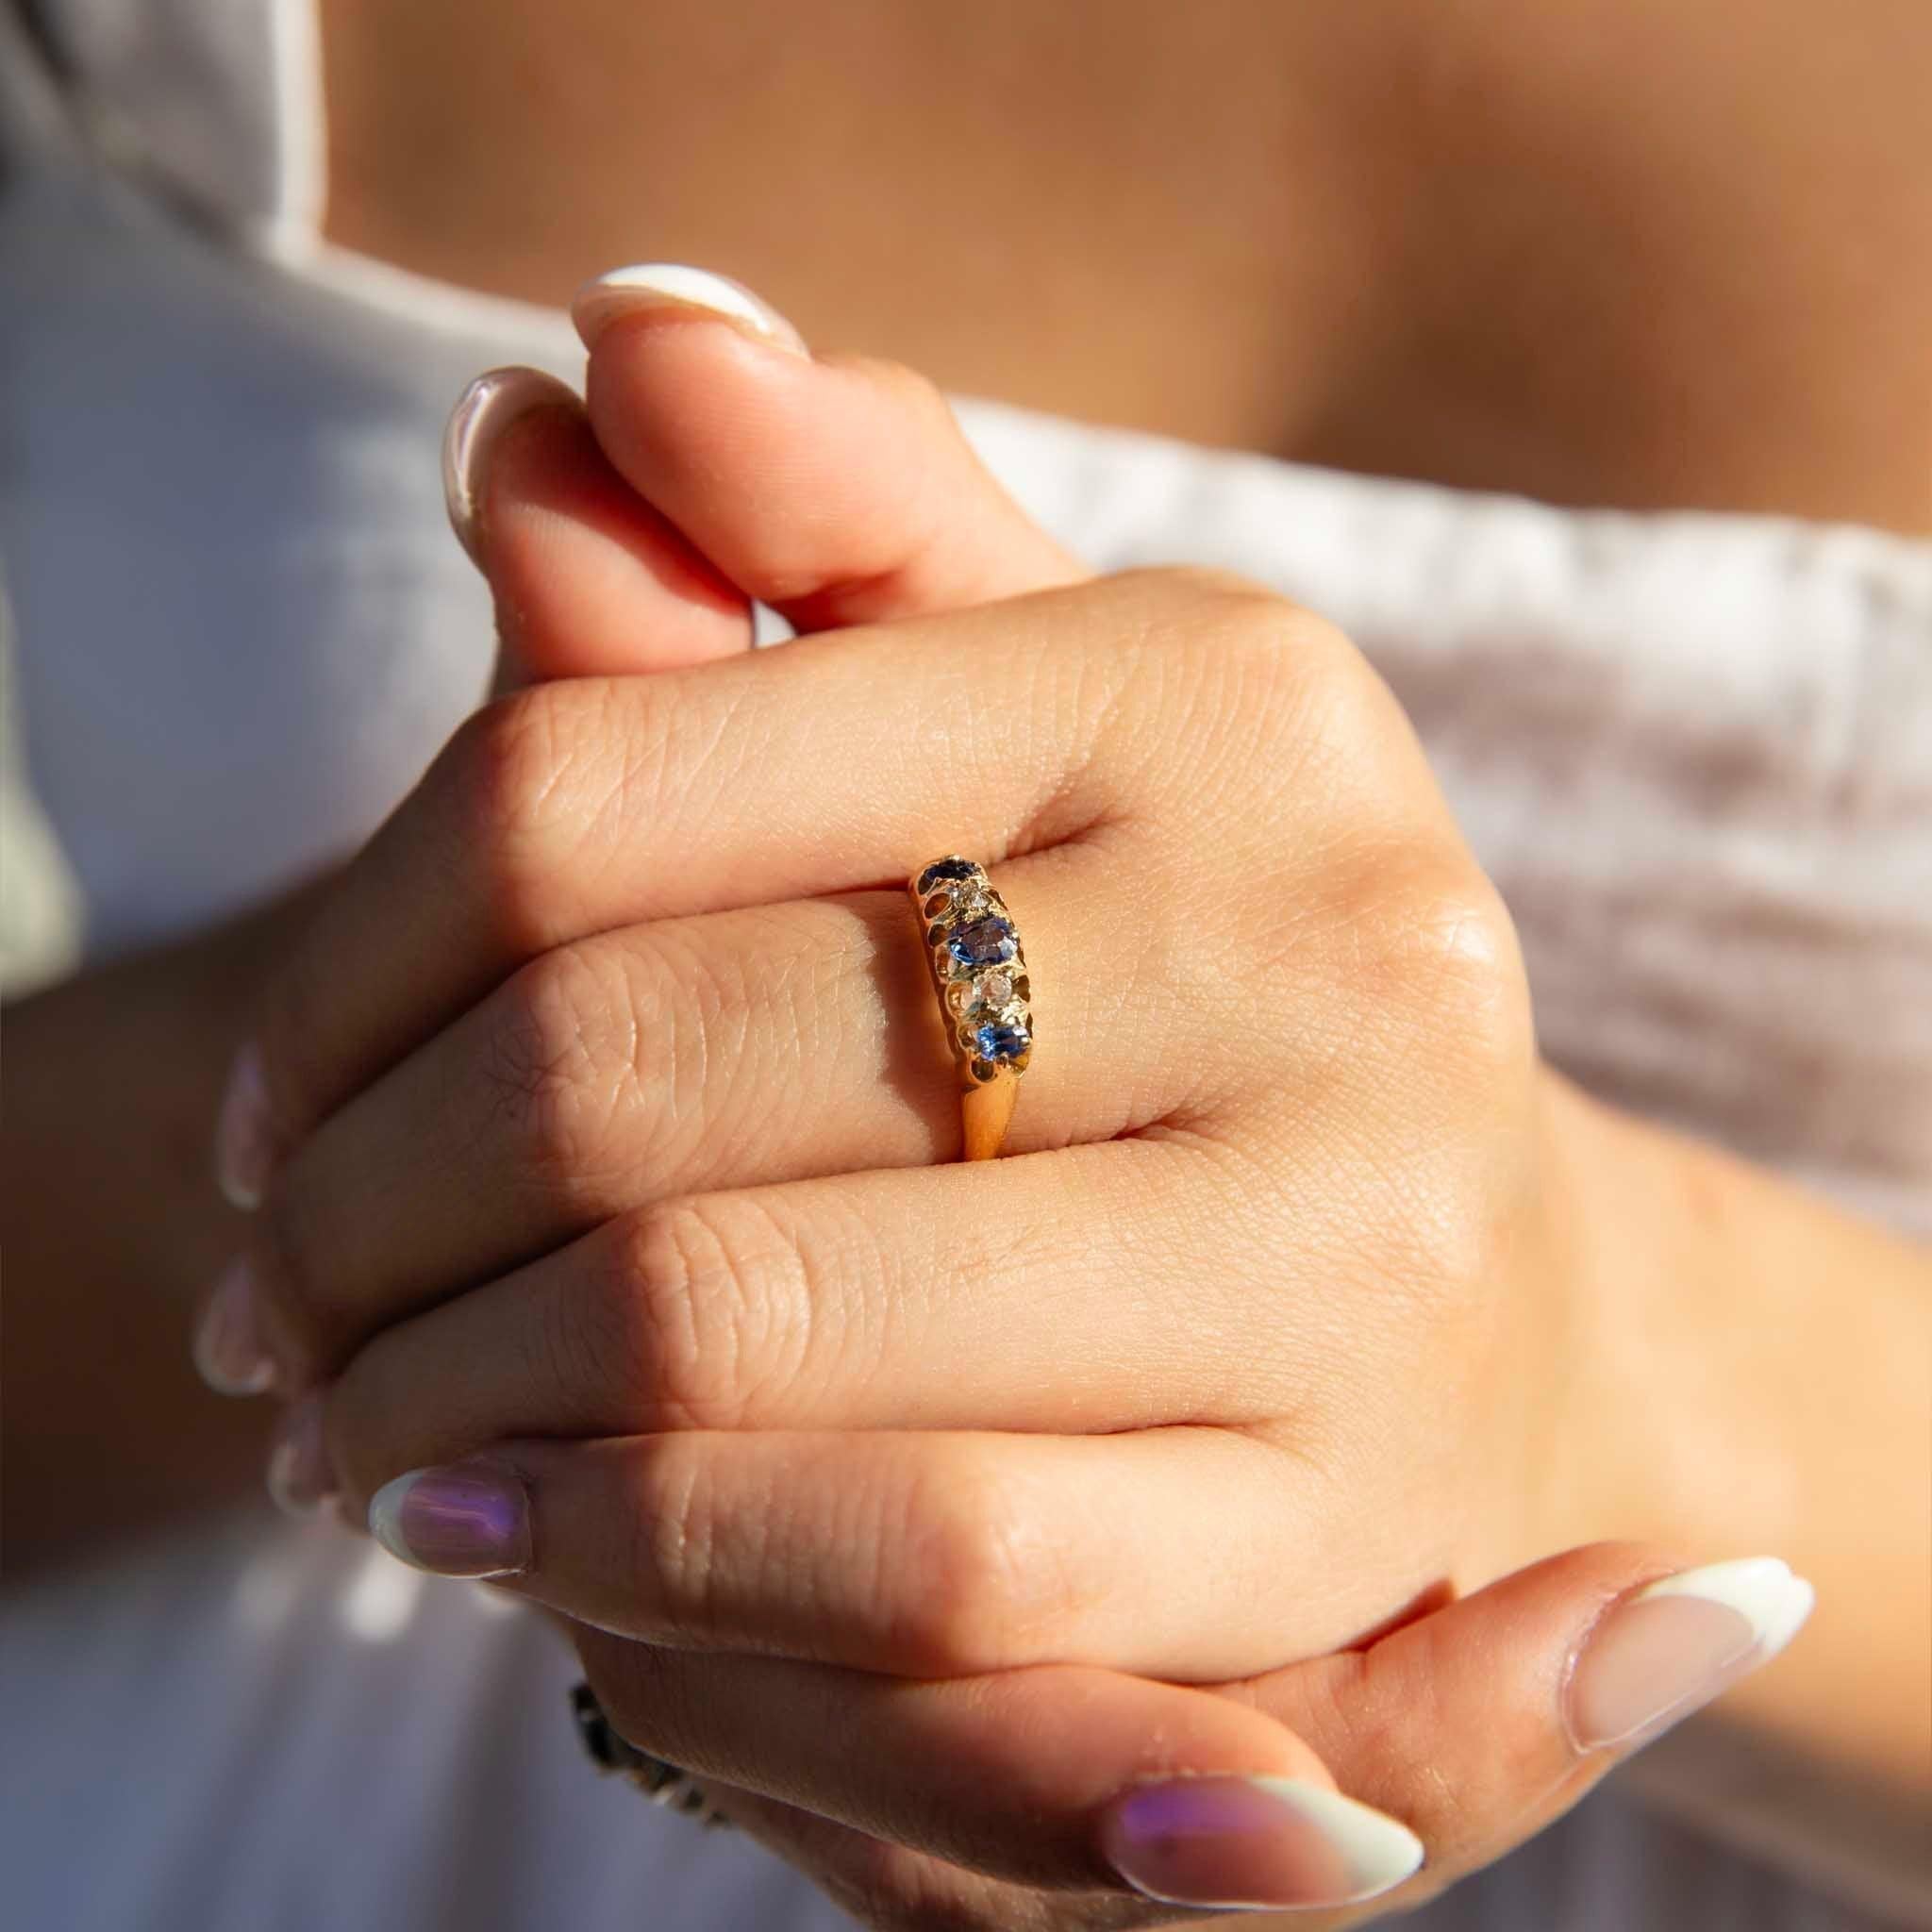 Sweetly crafted in 18 carat gold, The Janice Ring is a vintage joy. Her intricate London Bridge setting holds three royal blue sapphires and two sparkling diamonds. From another time and place, she has found her way to us and to you.

The Janice